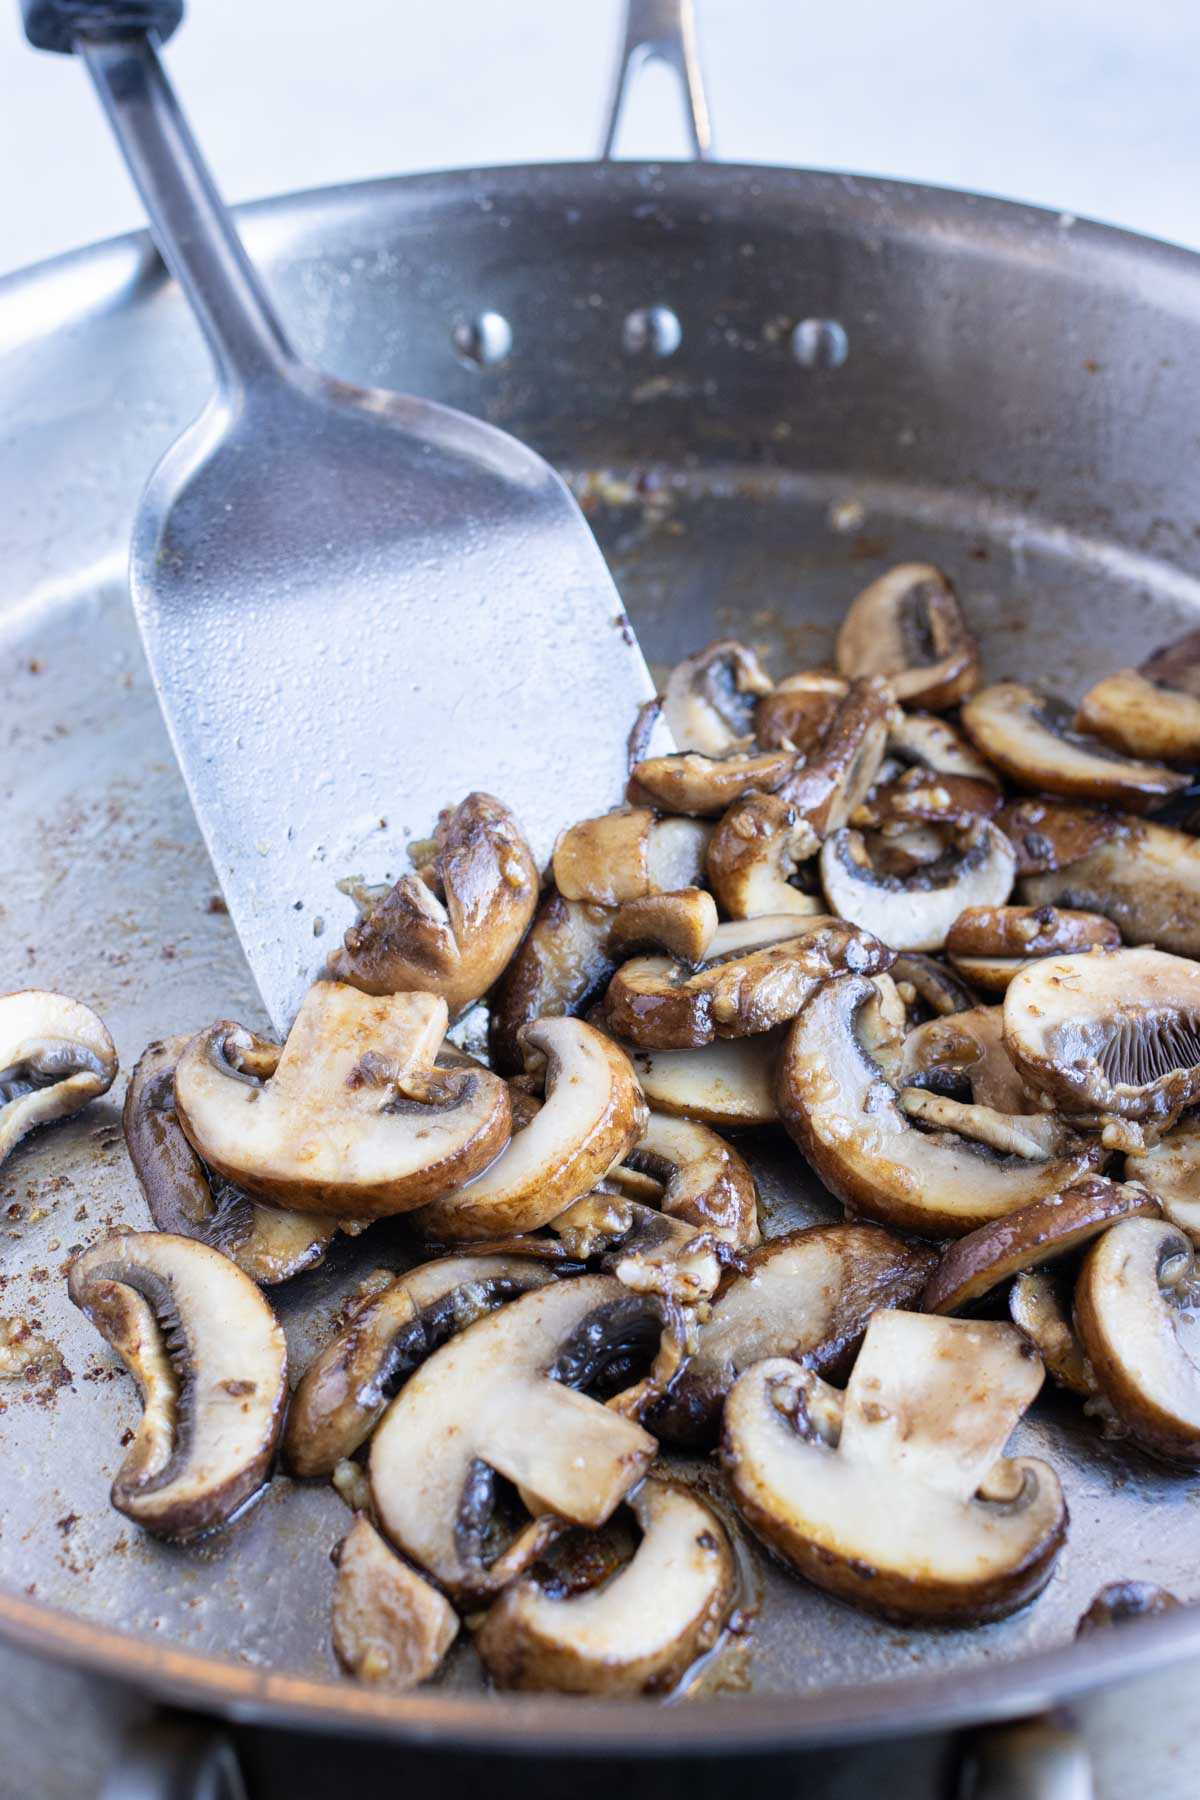 Mushrooms are added to the pan.